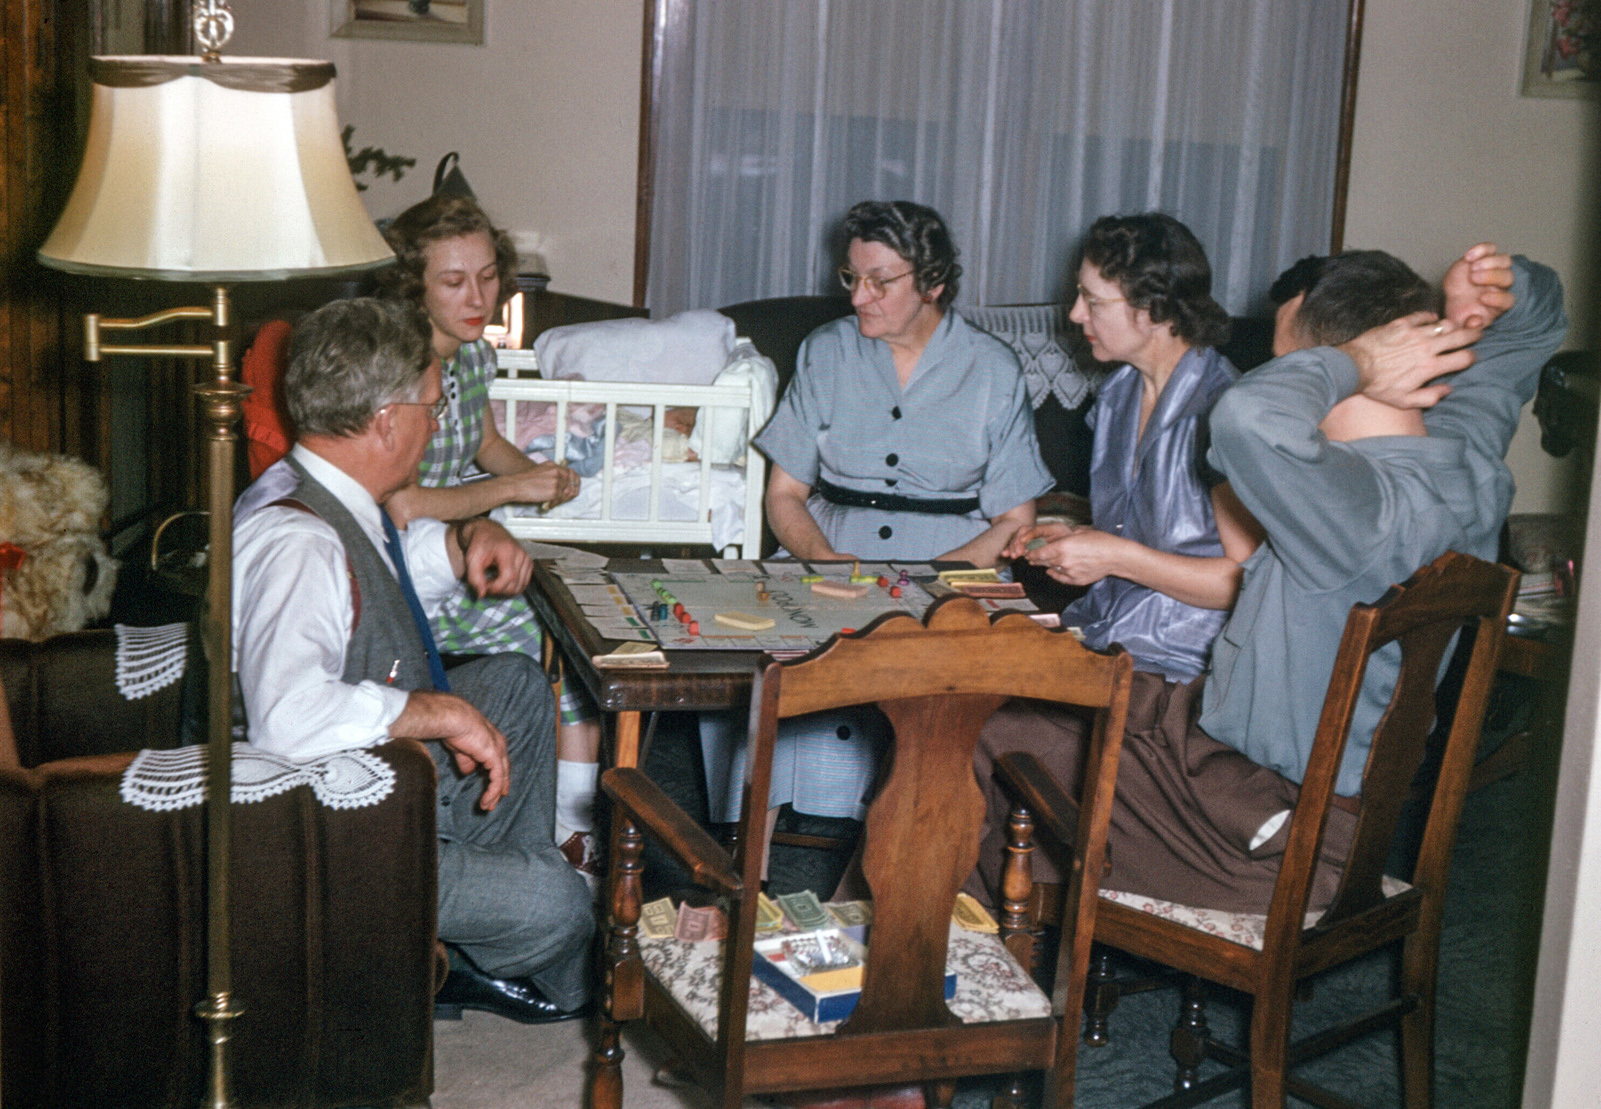 Bert and Iva's daughter Helen is home to Wausau, Wisconsin, from California with the new baby. While Baby sleeps, the grandparents and parents play a lively game of Monopoly. Kodachrome from the Bert's Slides Collection. View full size.